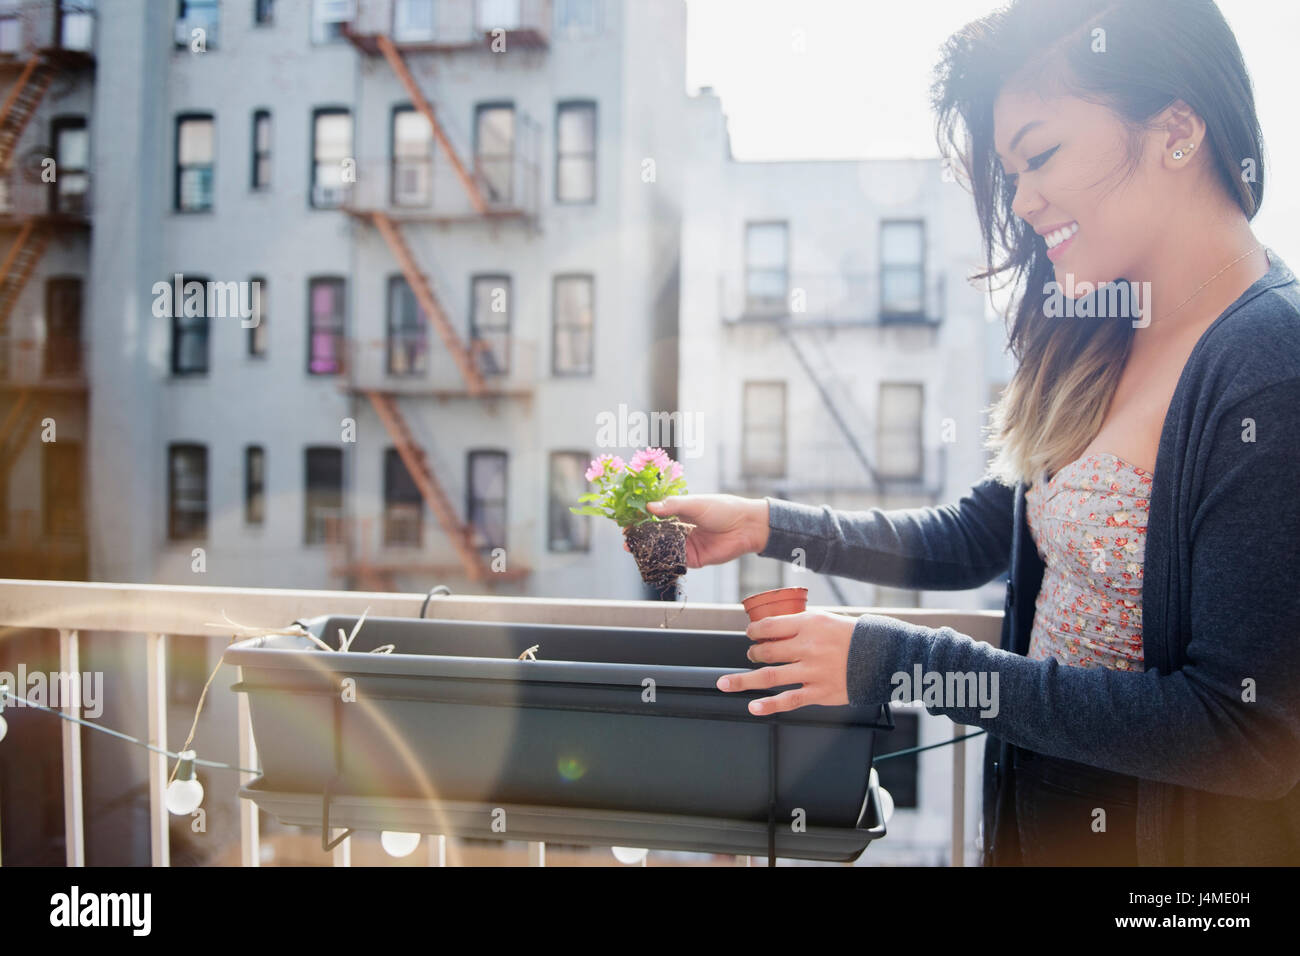 Mixed Race woman planting flowers in rooftop planter Stock Photo